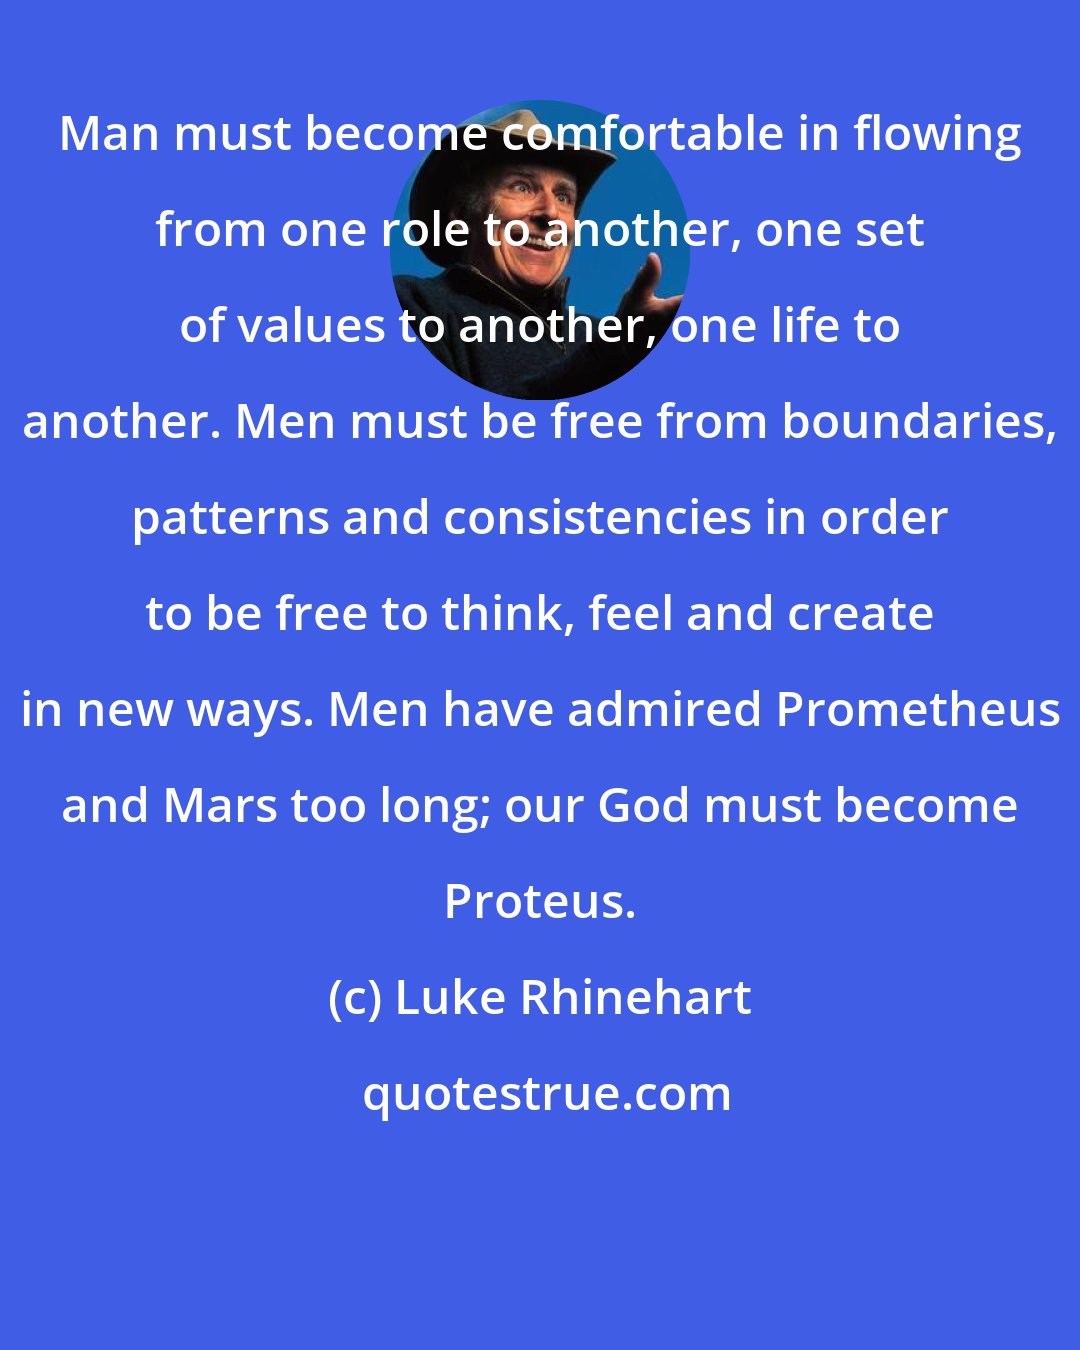 Luke Rhinehart: Man must become comfortable in flowing from one role to another, one set of values to another, one life to another. Men must be free from boundaries, patterns and consistencies in order to be free to think, feel and create in new ways. Men have admired Prometheus and Mars too long; our God must become Proteus.